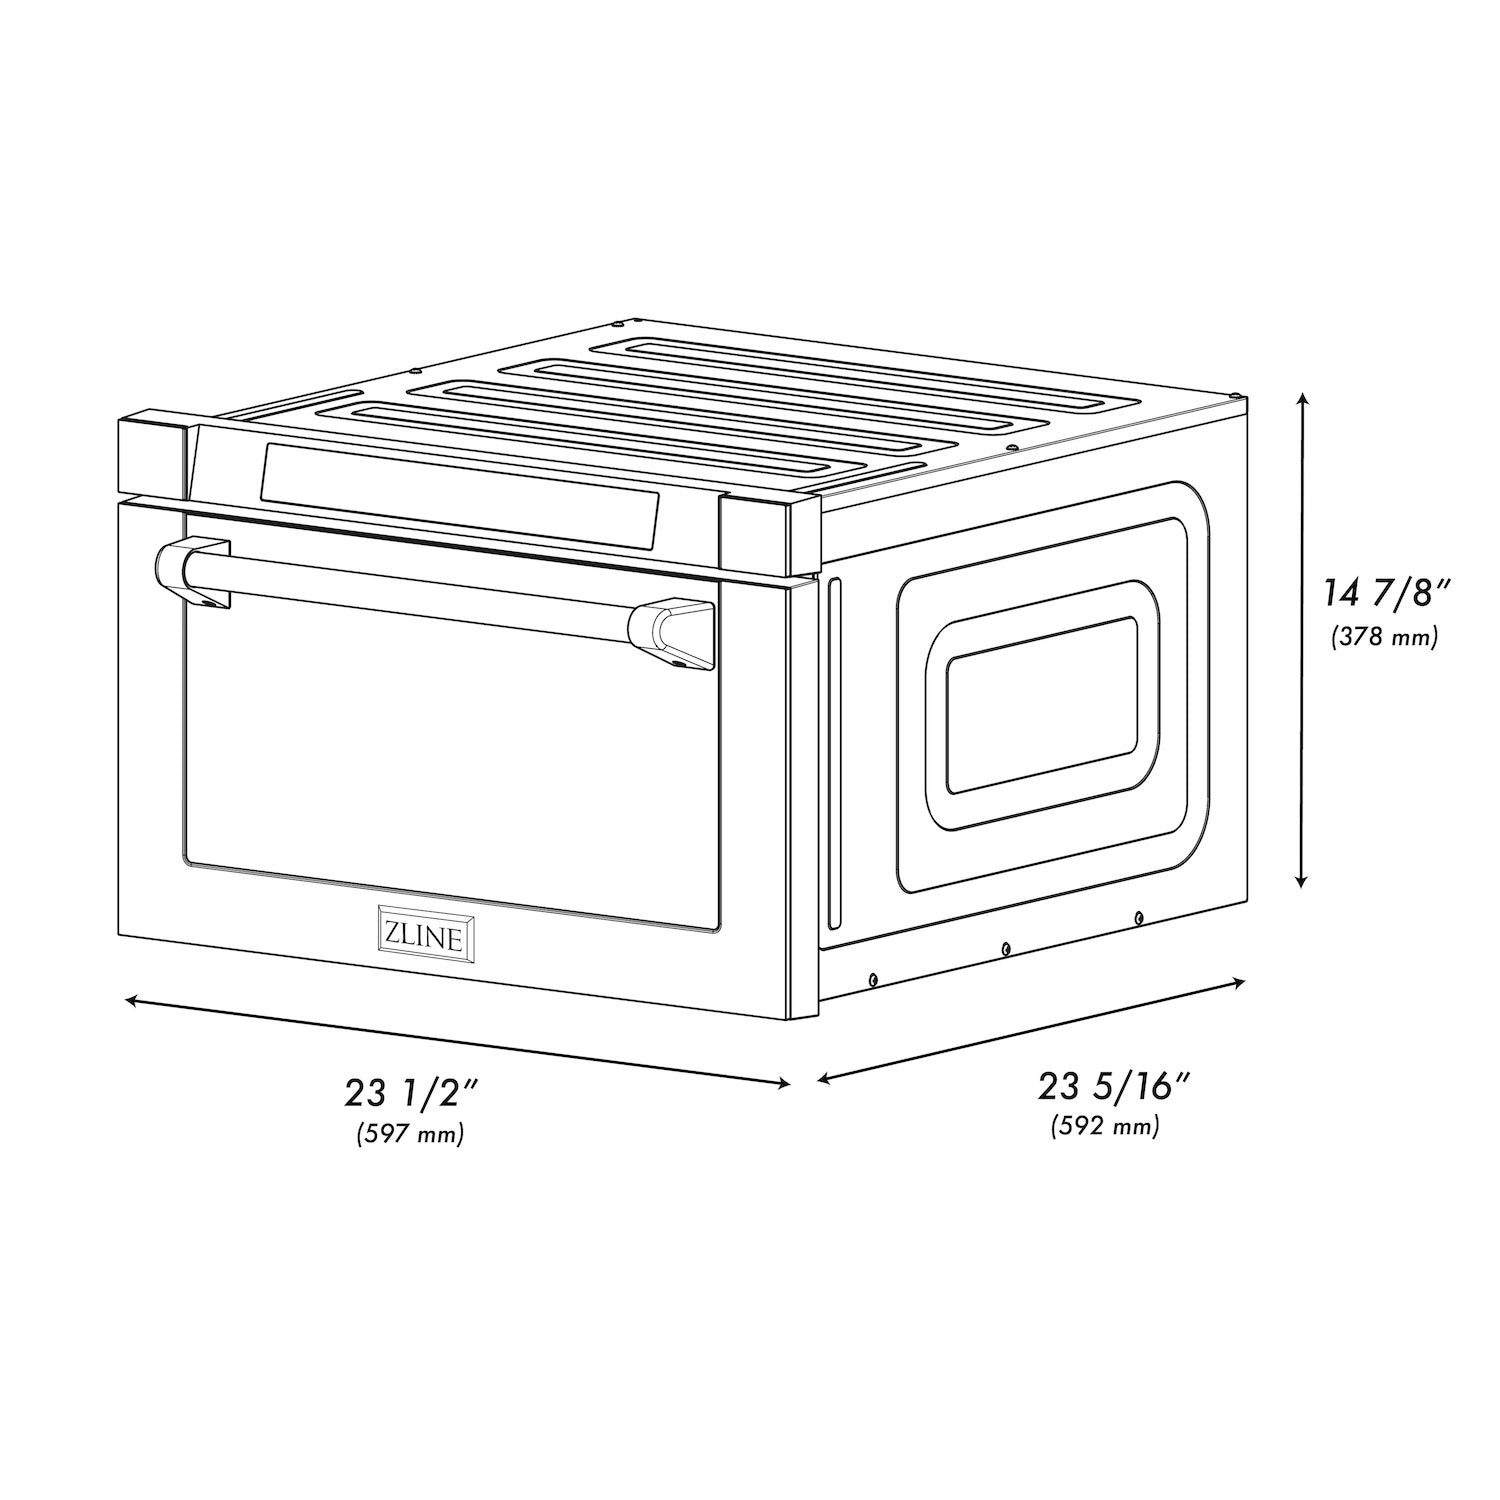 ZLINE 24 in. 1.2 cu. ft. Built-in Microwave Drawer in Stainless Steel with a Traditional Handle (MWD-1-H)